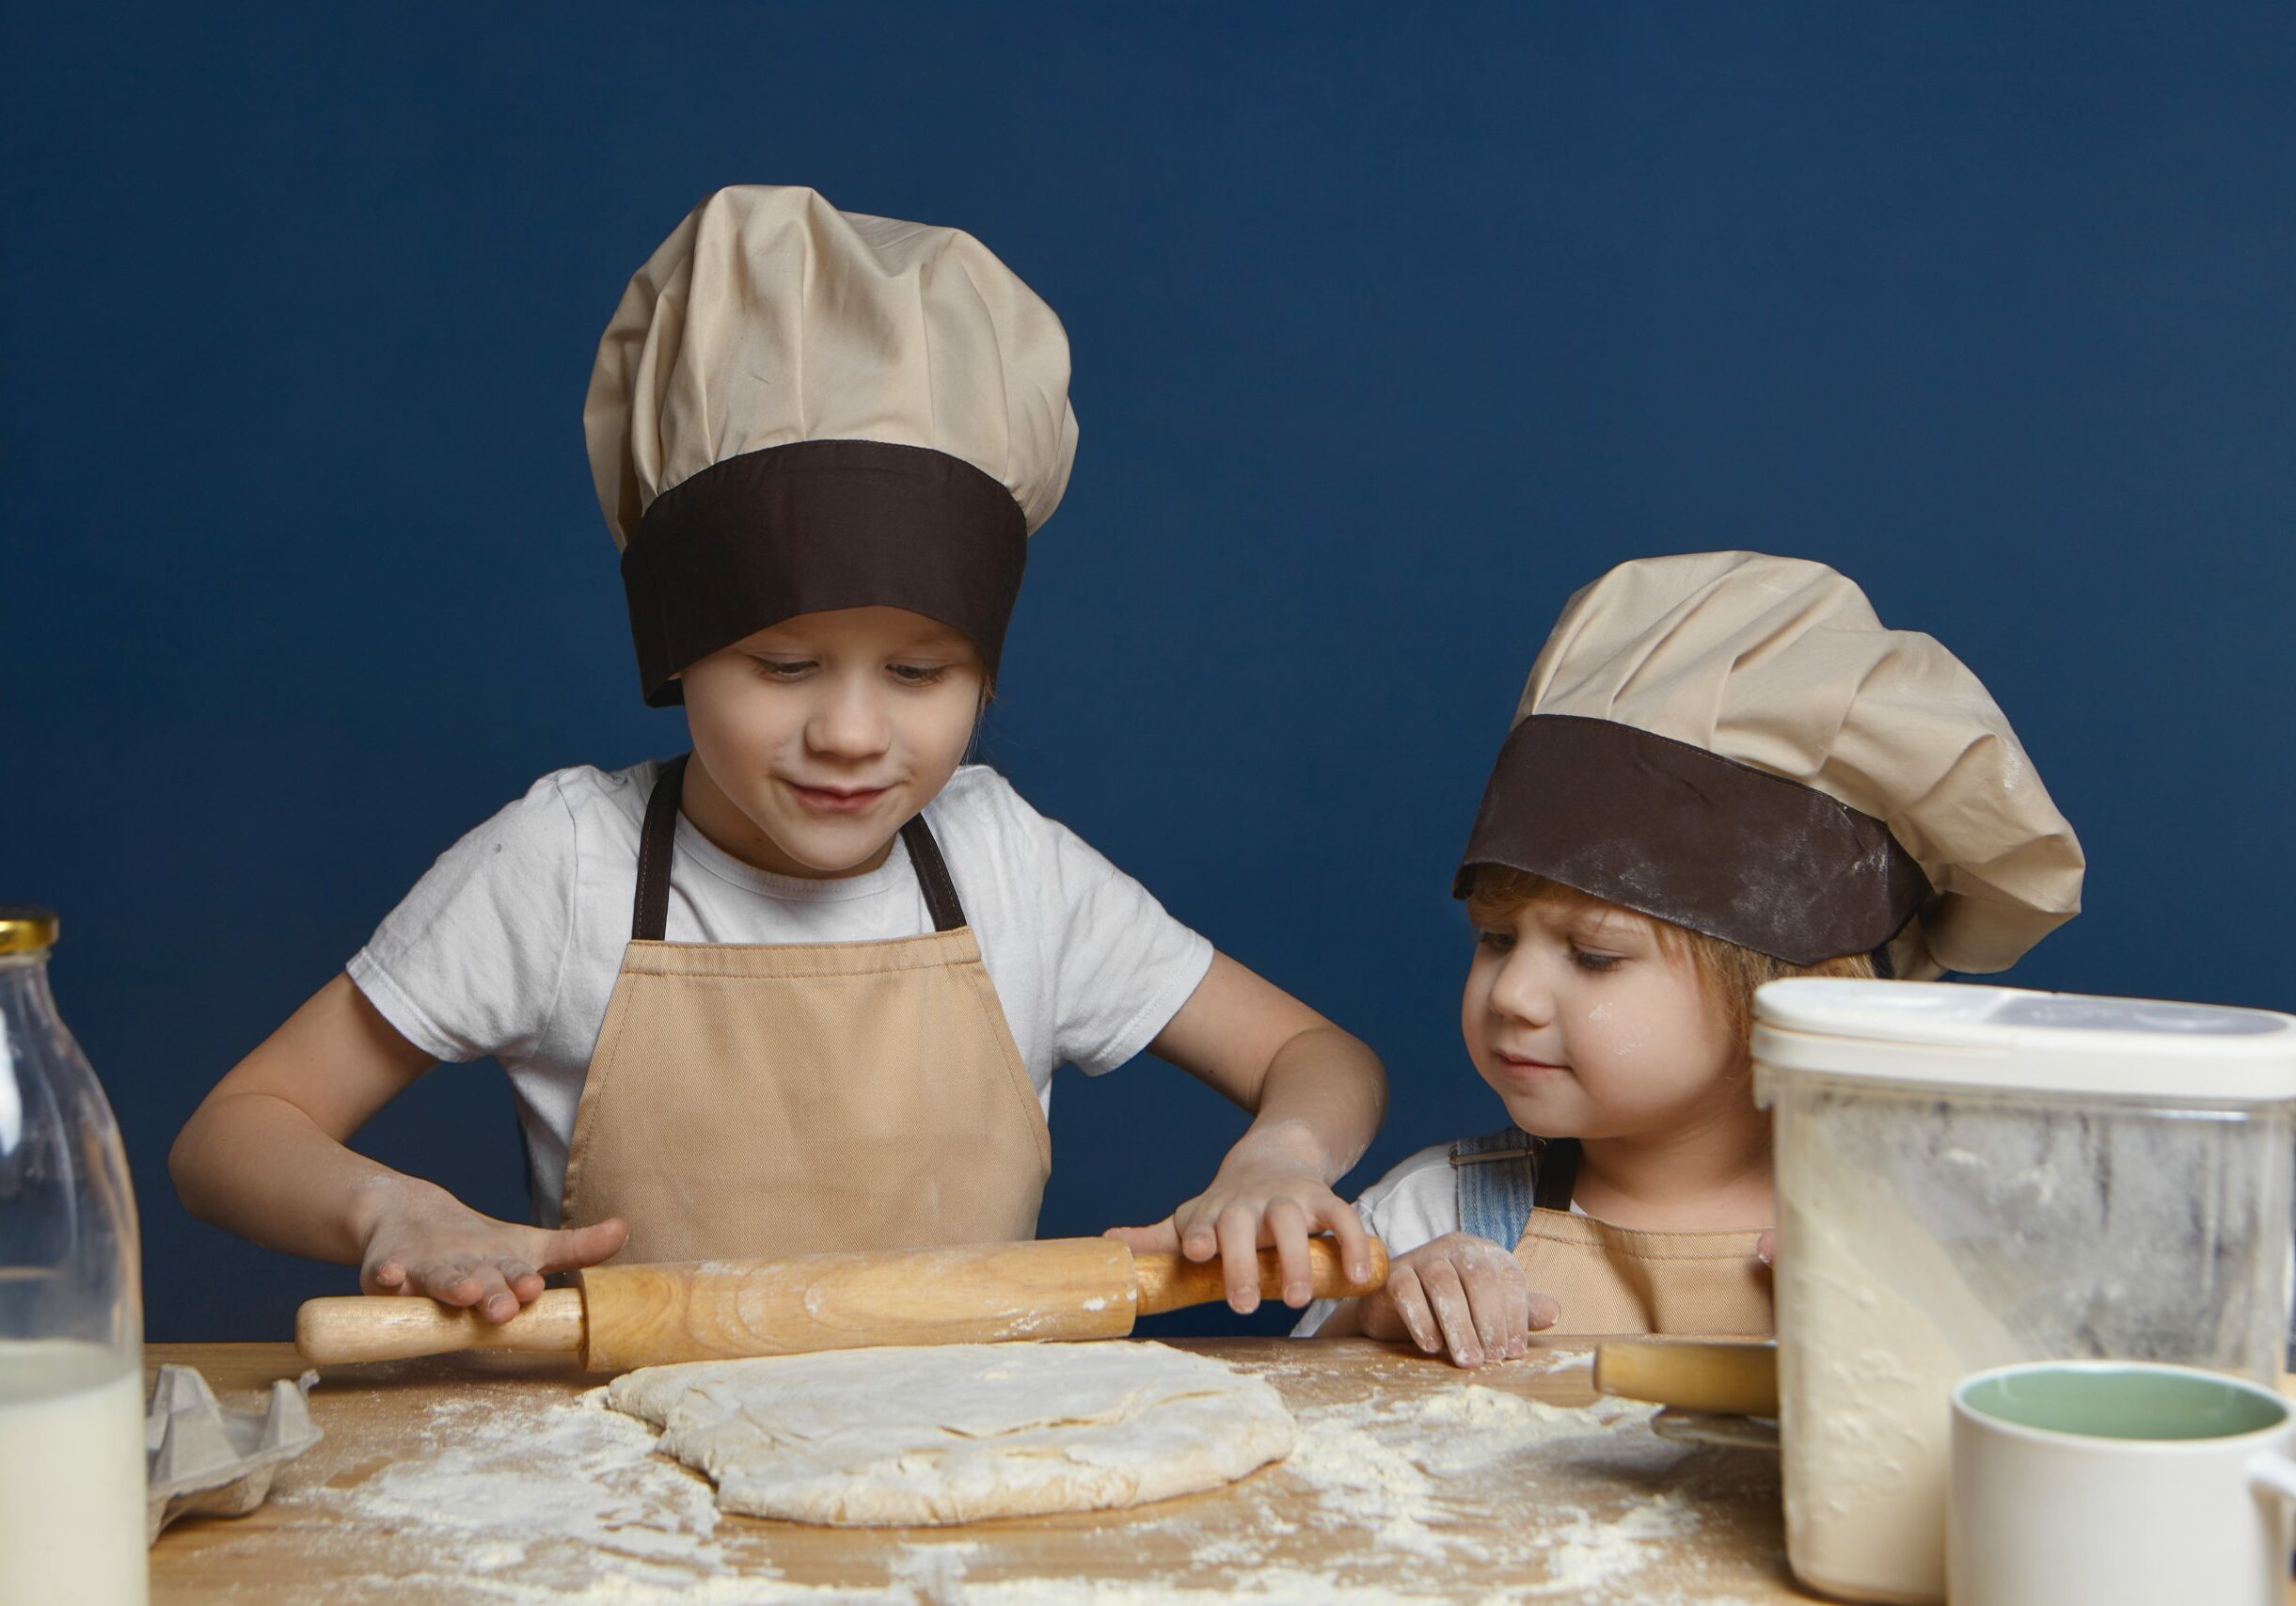 candid-shot-charming-little-girl-chef-hat-watching-her-elderly-brother-kneading-dough-cookies-pie-scaled-1.jpg